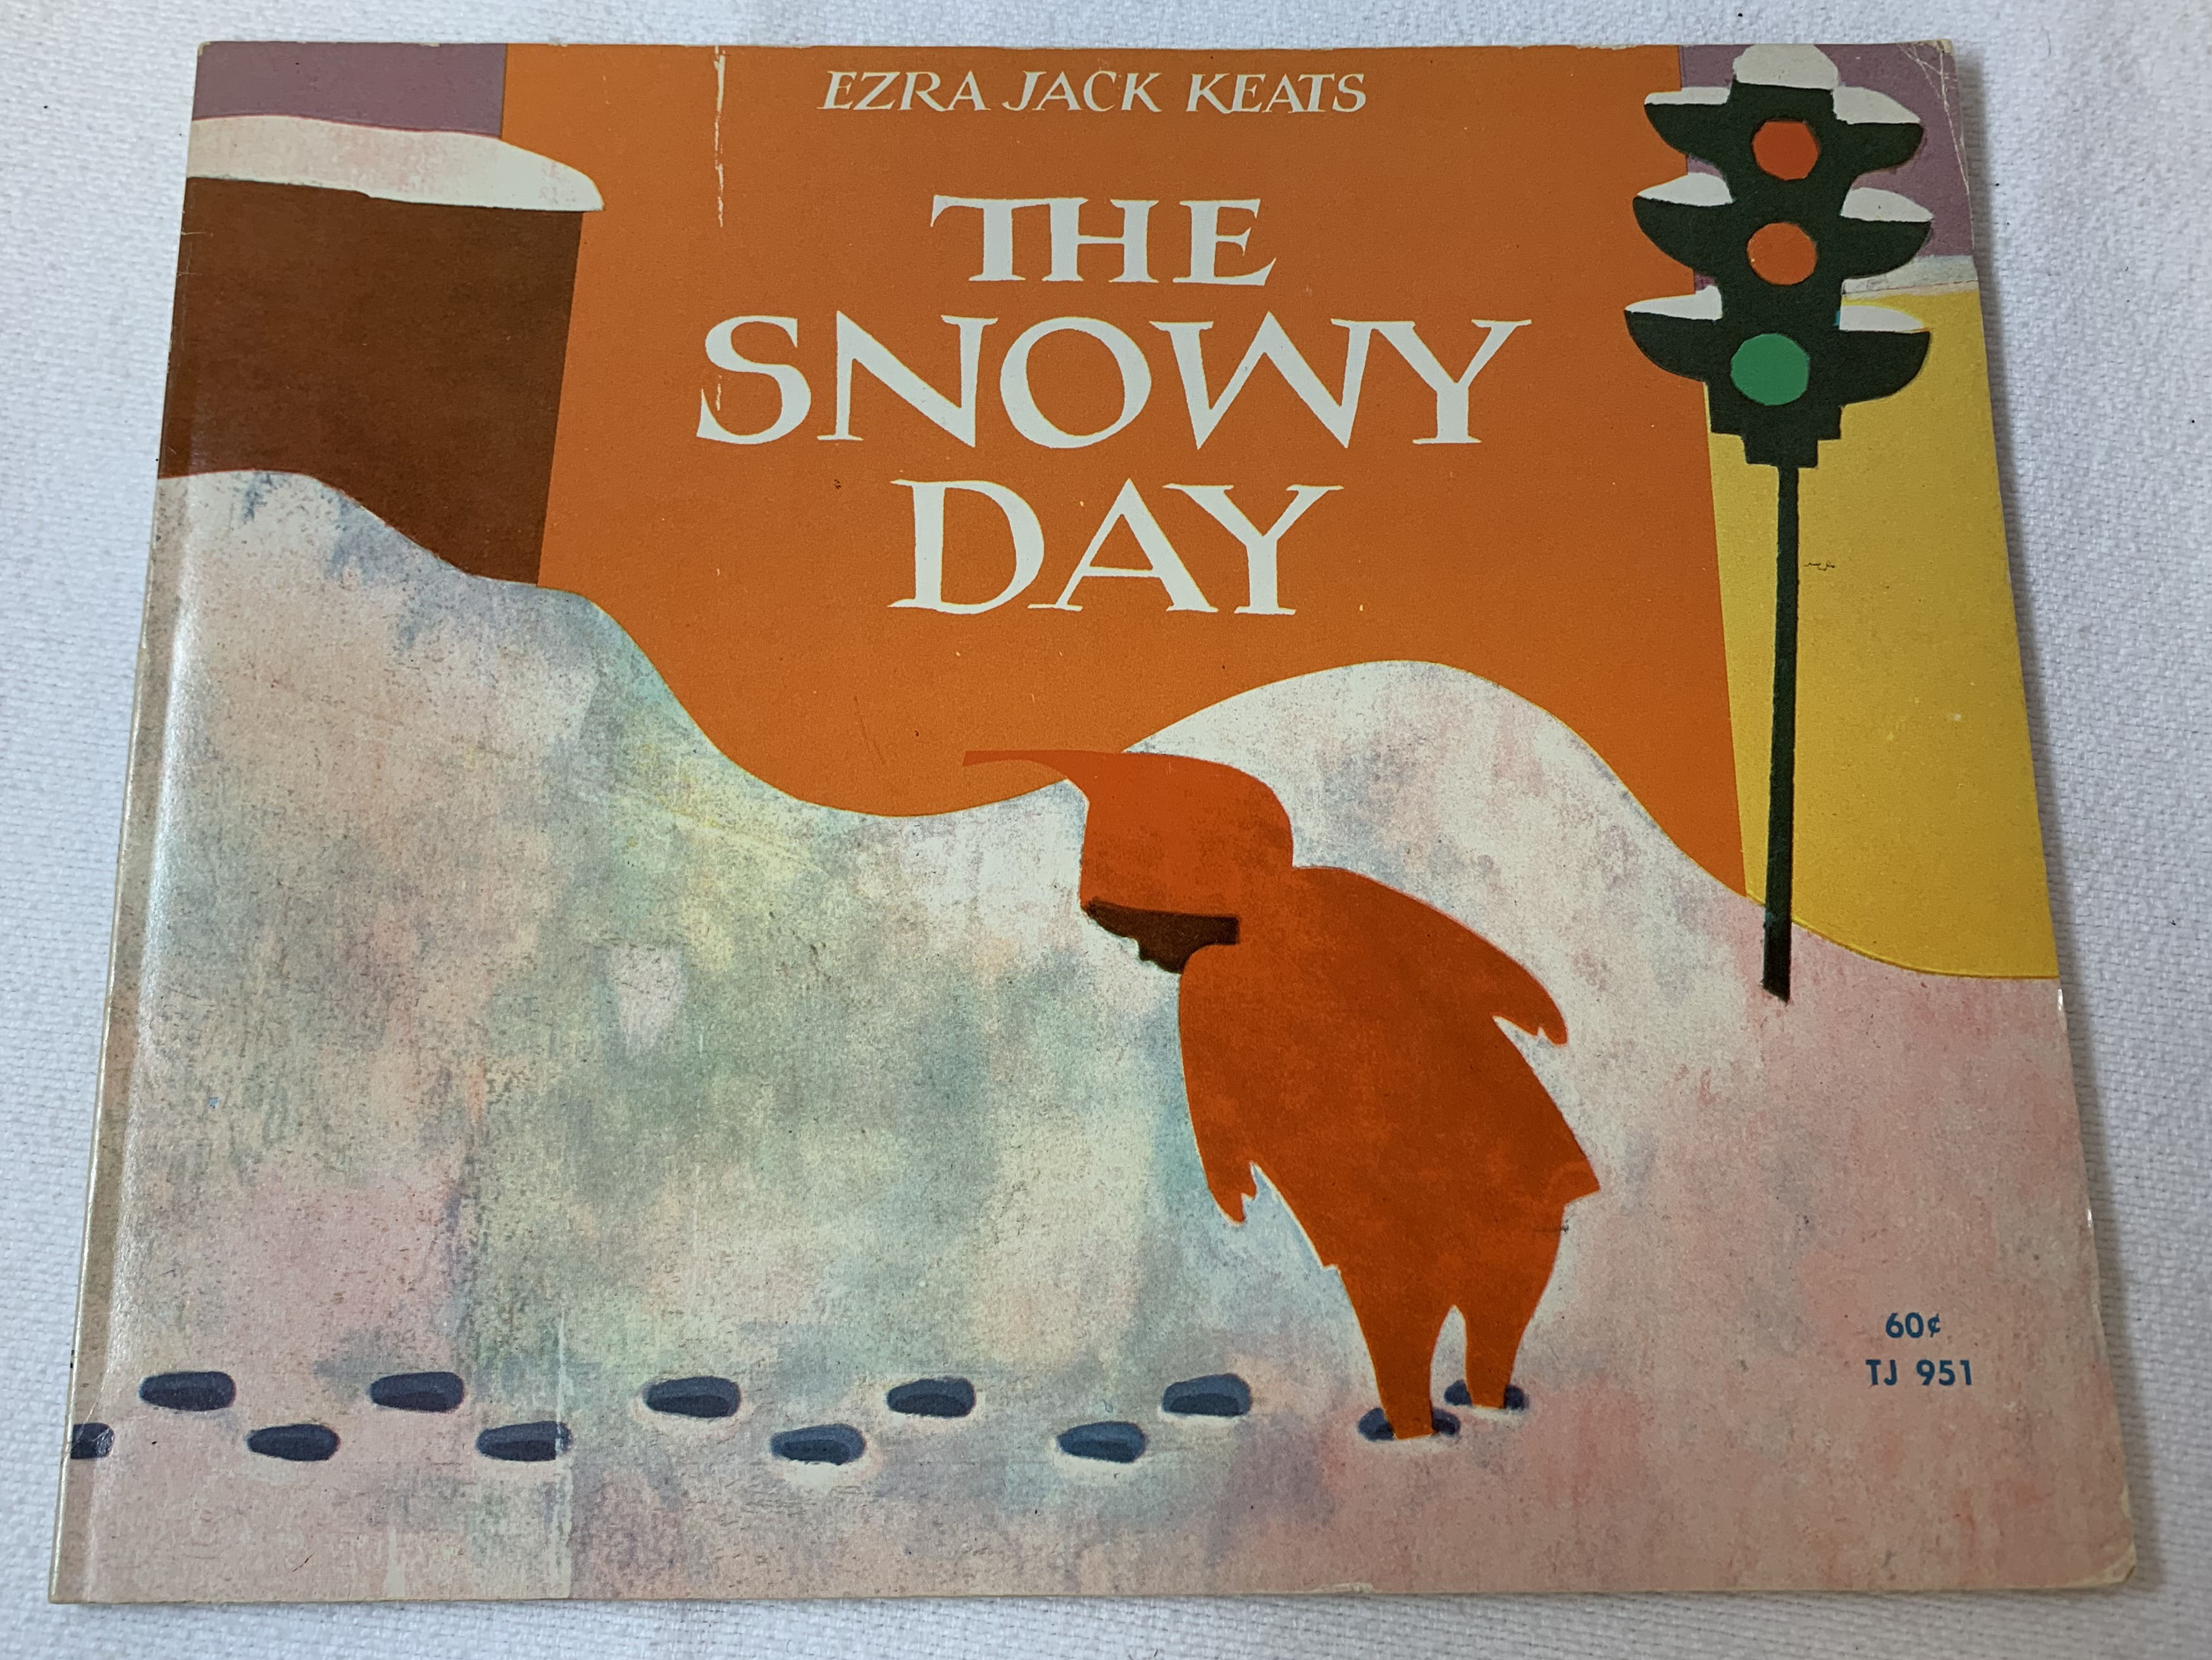 the-snowy-day-by-ezra-jack-keats-printable-book-cover-etsy-uk